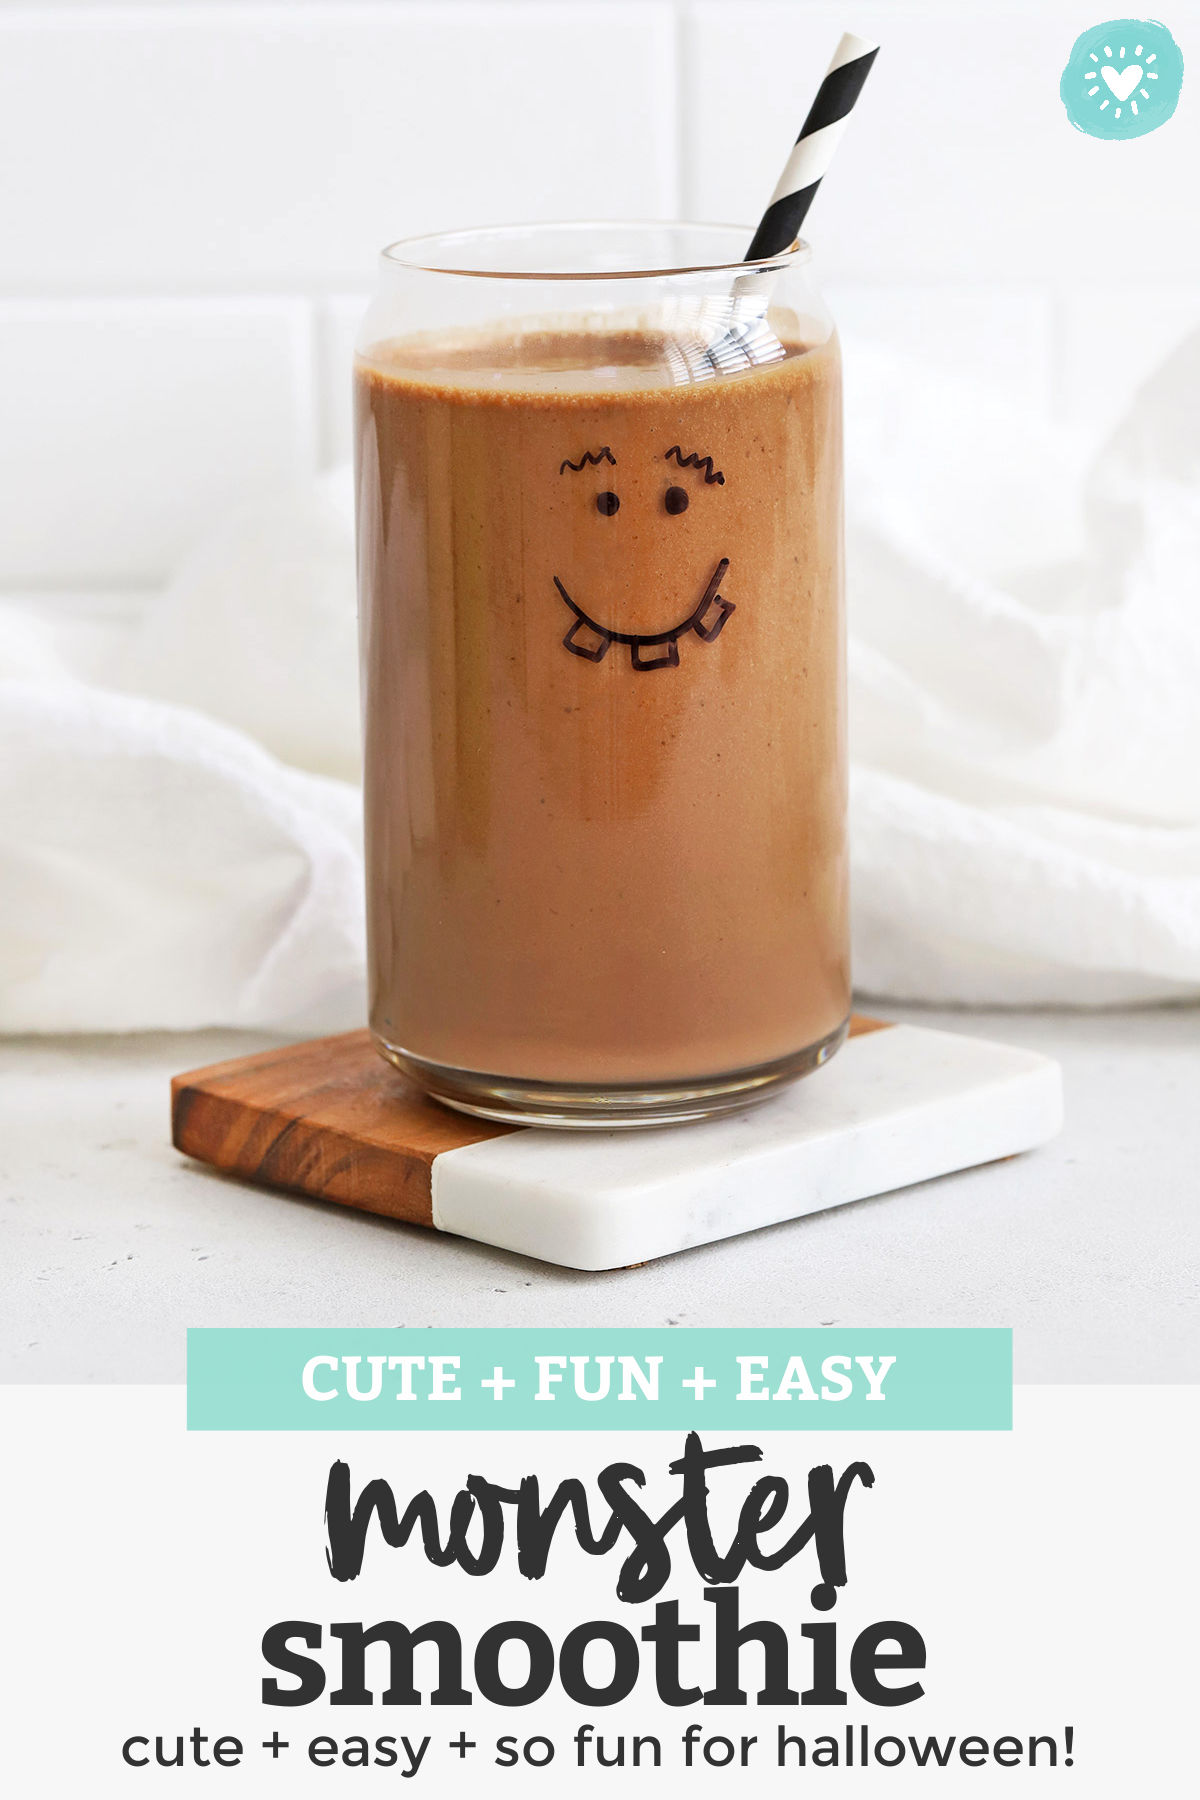 Halloween Monster Smoothies - Learn how to use a marker to make adorable monster smoothies on your smoothie cups. The perfect Halloween breakfast or healthy Hallowen snack! // Halloween ideas for kids // green monster smoothie // halloween party food